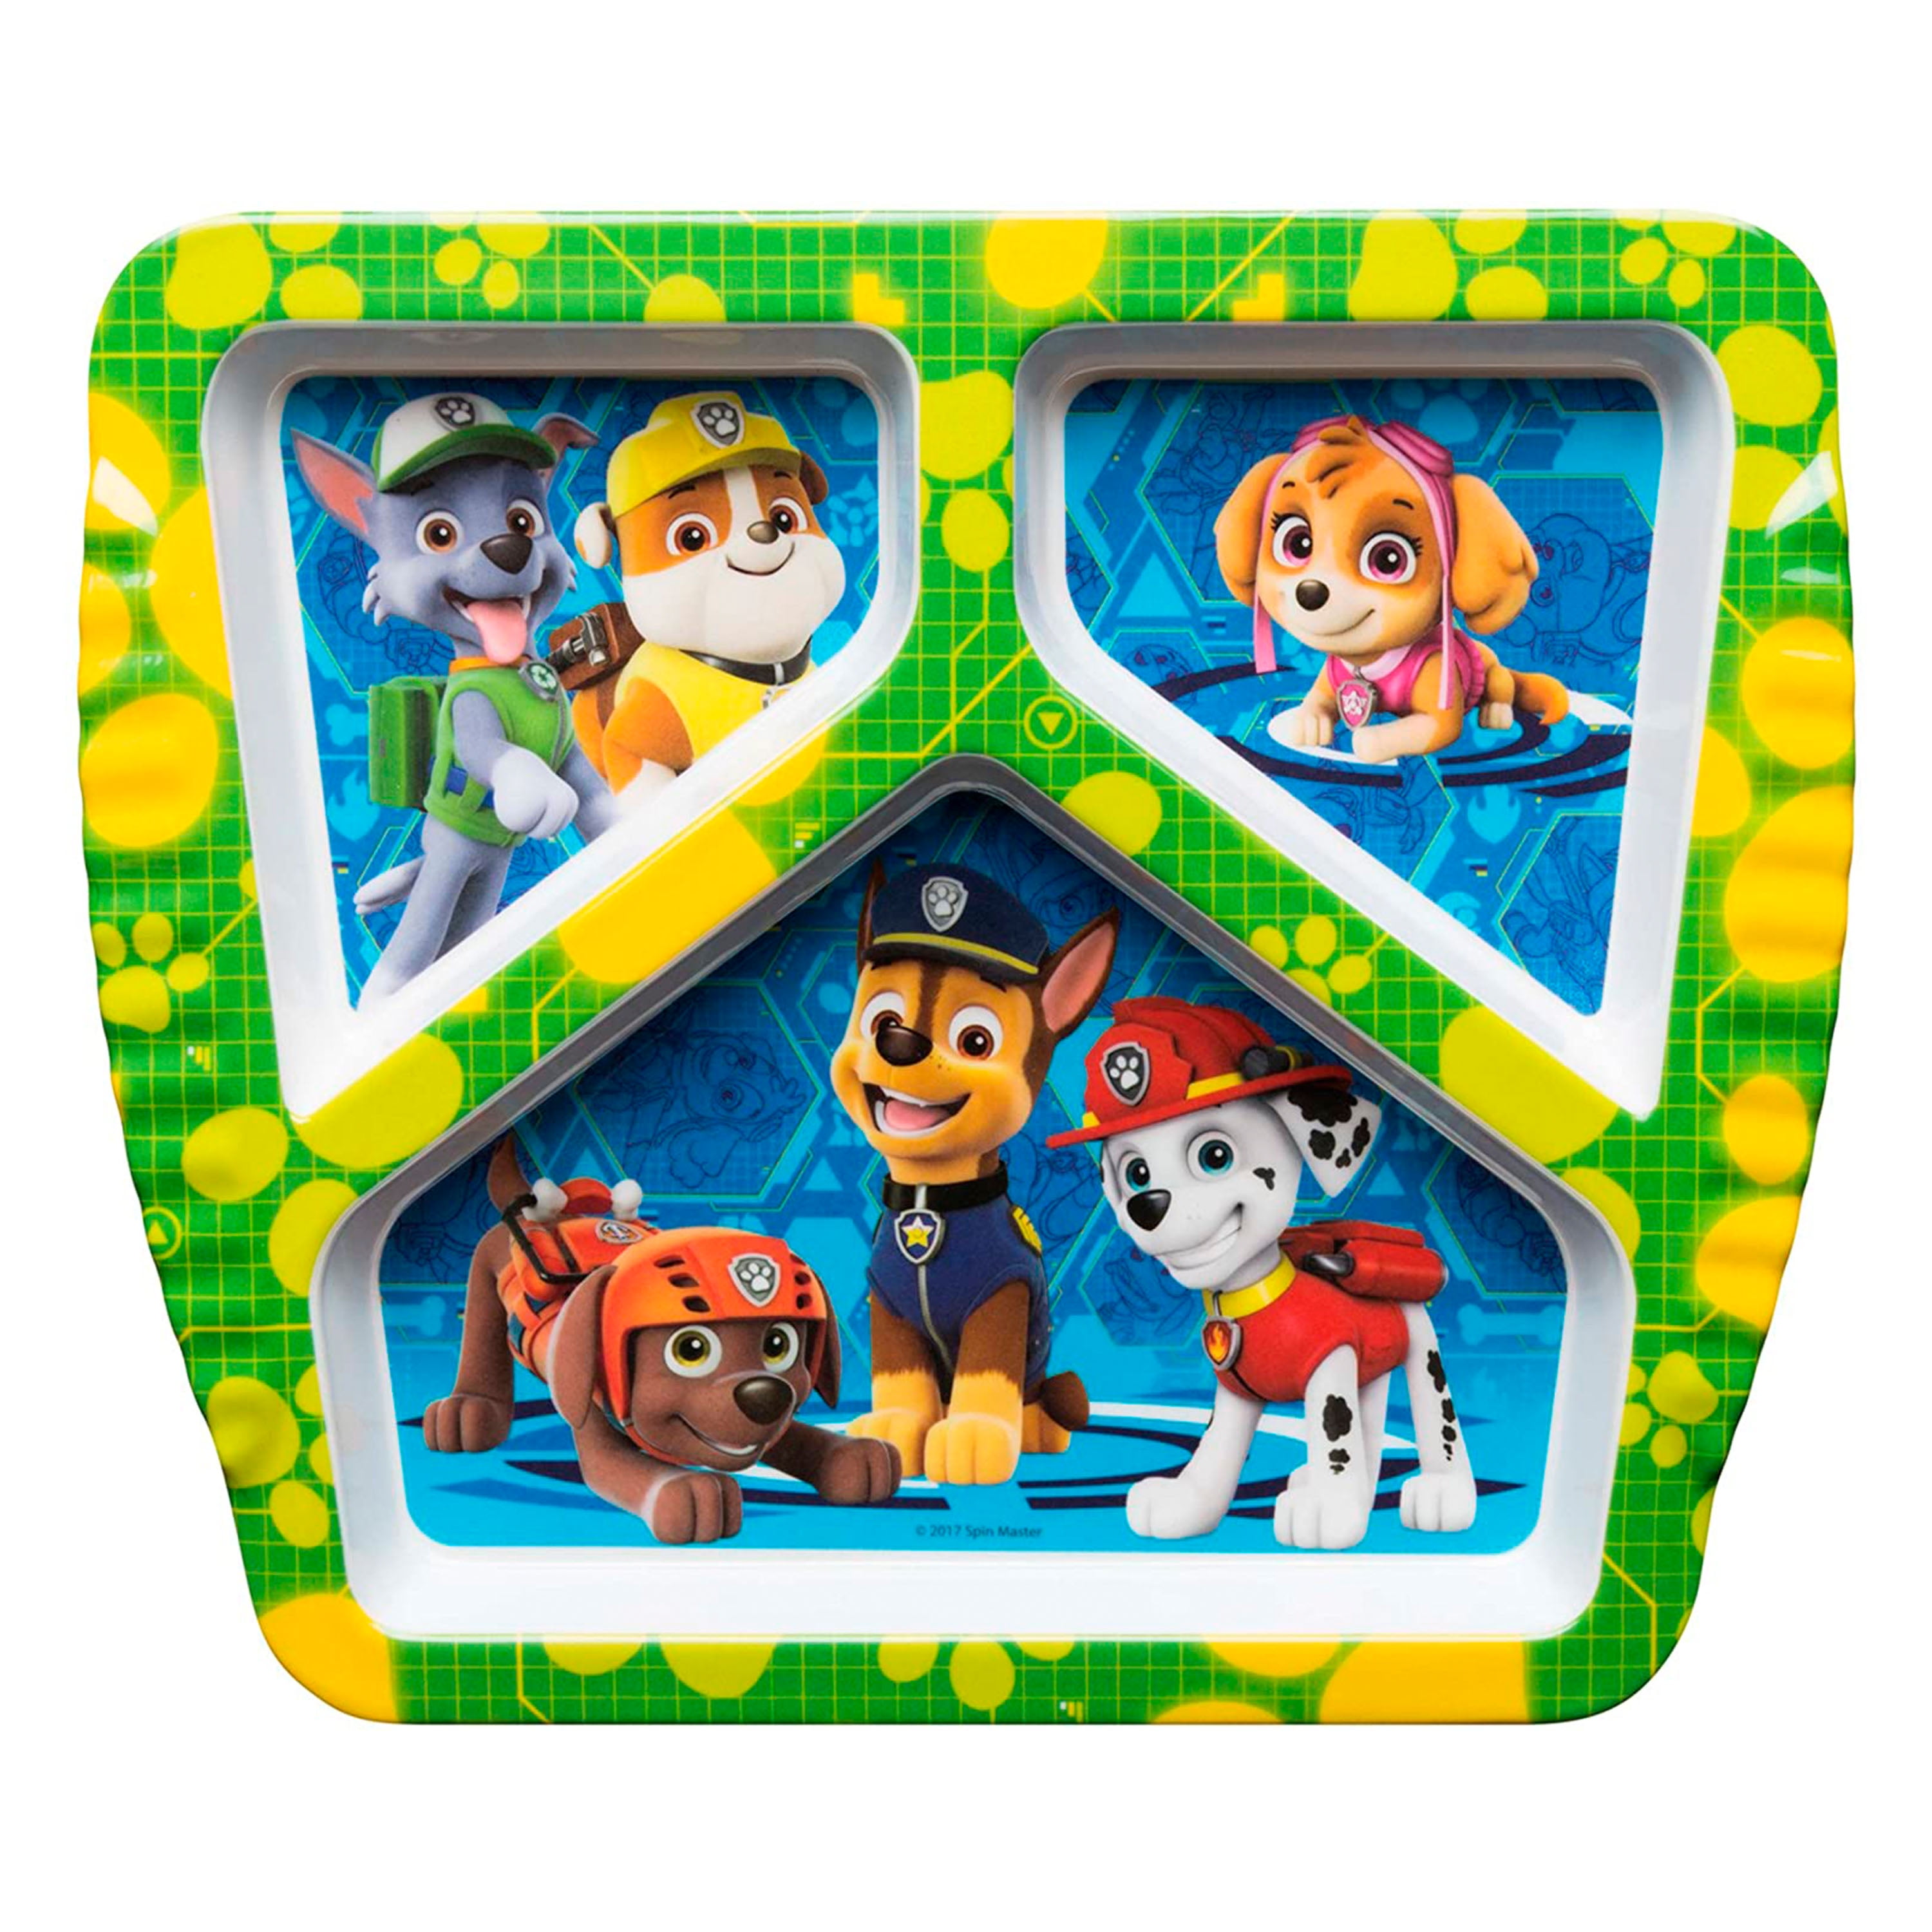 Zak Designs PAW Patrol Kids Dinnerware Set 3 Pieces, Durable  and Sustainable Melamine Bamboo Plate, Bowl, and Tumbler are Perfect For  Dinner Time With Family (Chase, Marshall, Skye & Friends)